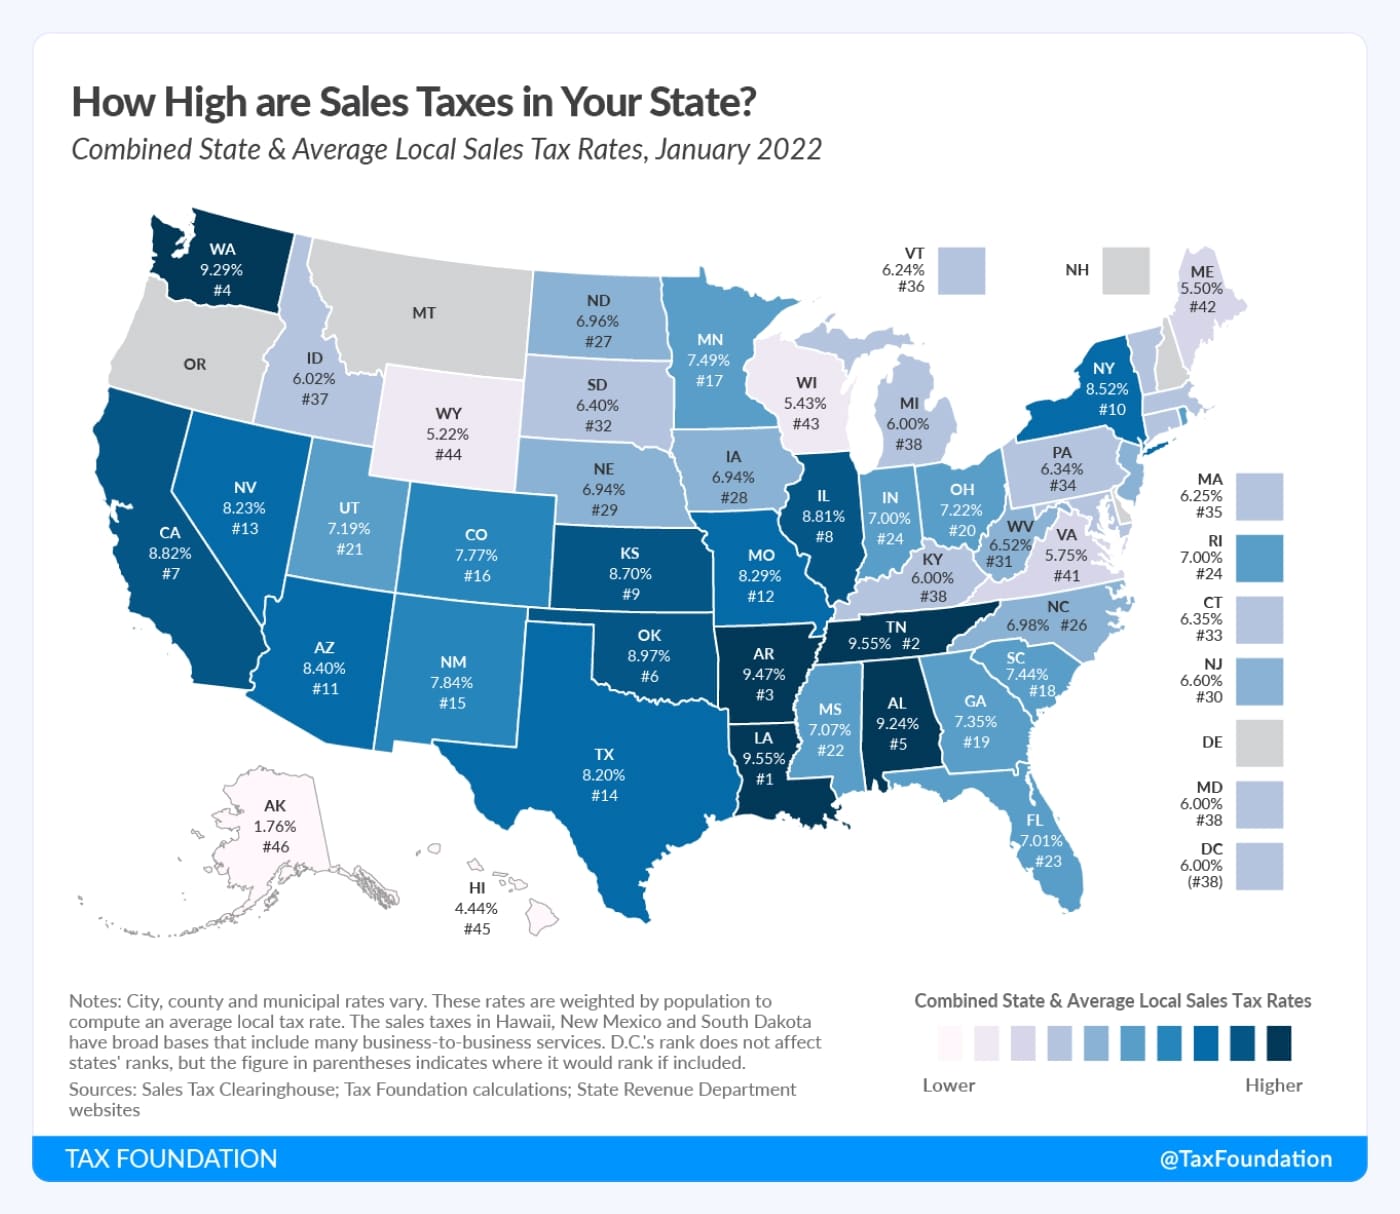 Combined State & Average Local Sales Tax Rates